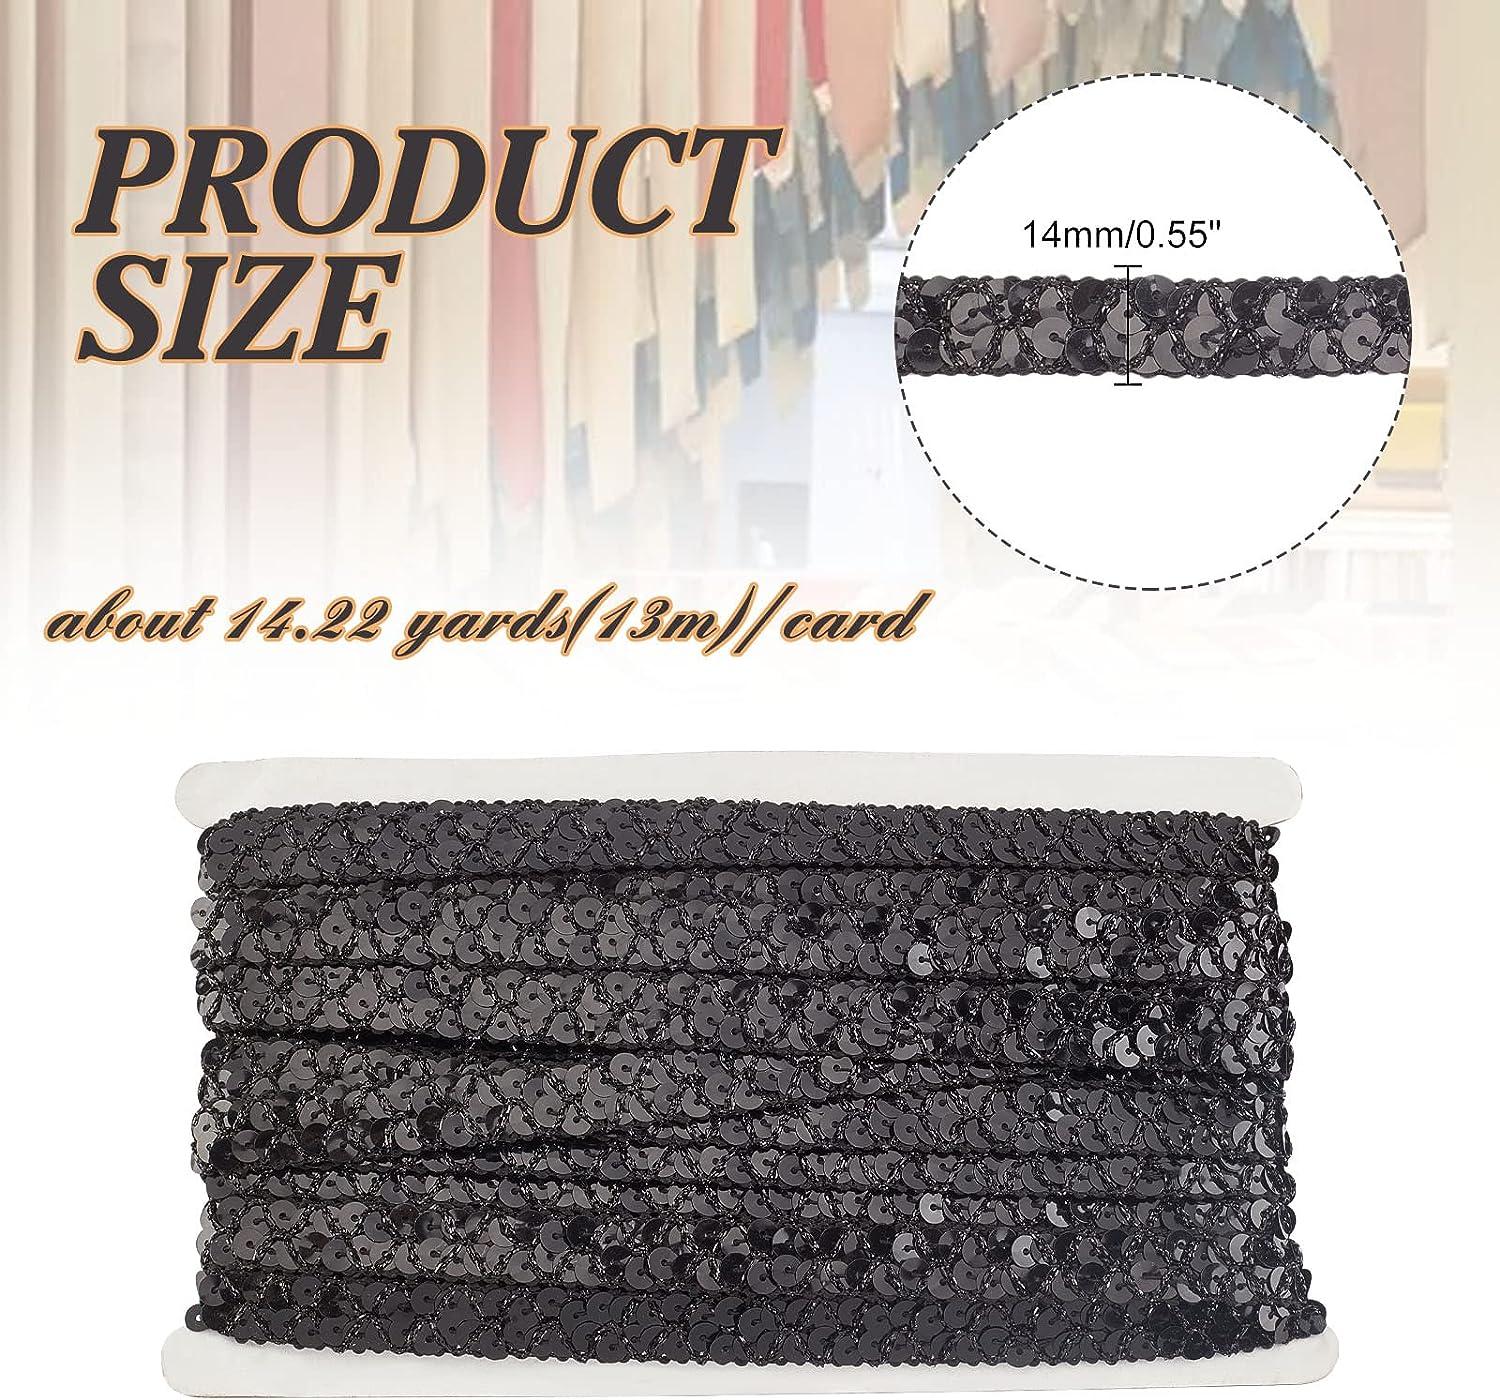 14 Yard Sequin Roll Metallic No Stretch Sequin Trim 2-Row Fabric Paillette  Ribbon Trim Black Lace Trim for Dress Embellish and Headband Sewing - Black